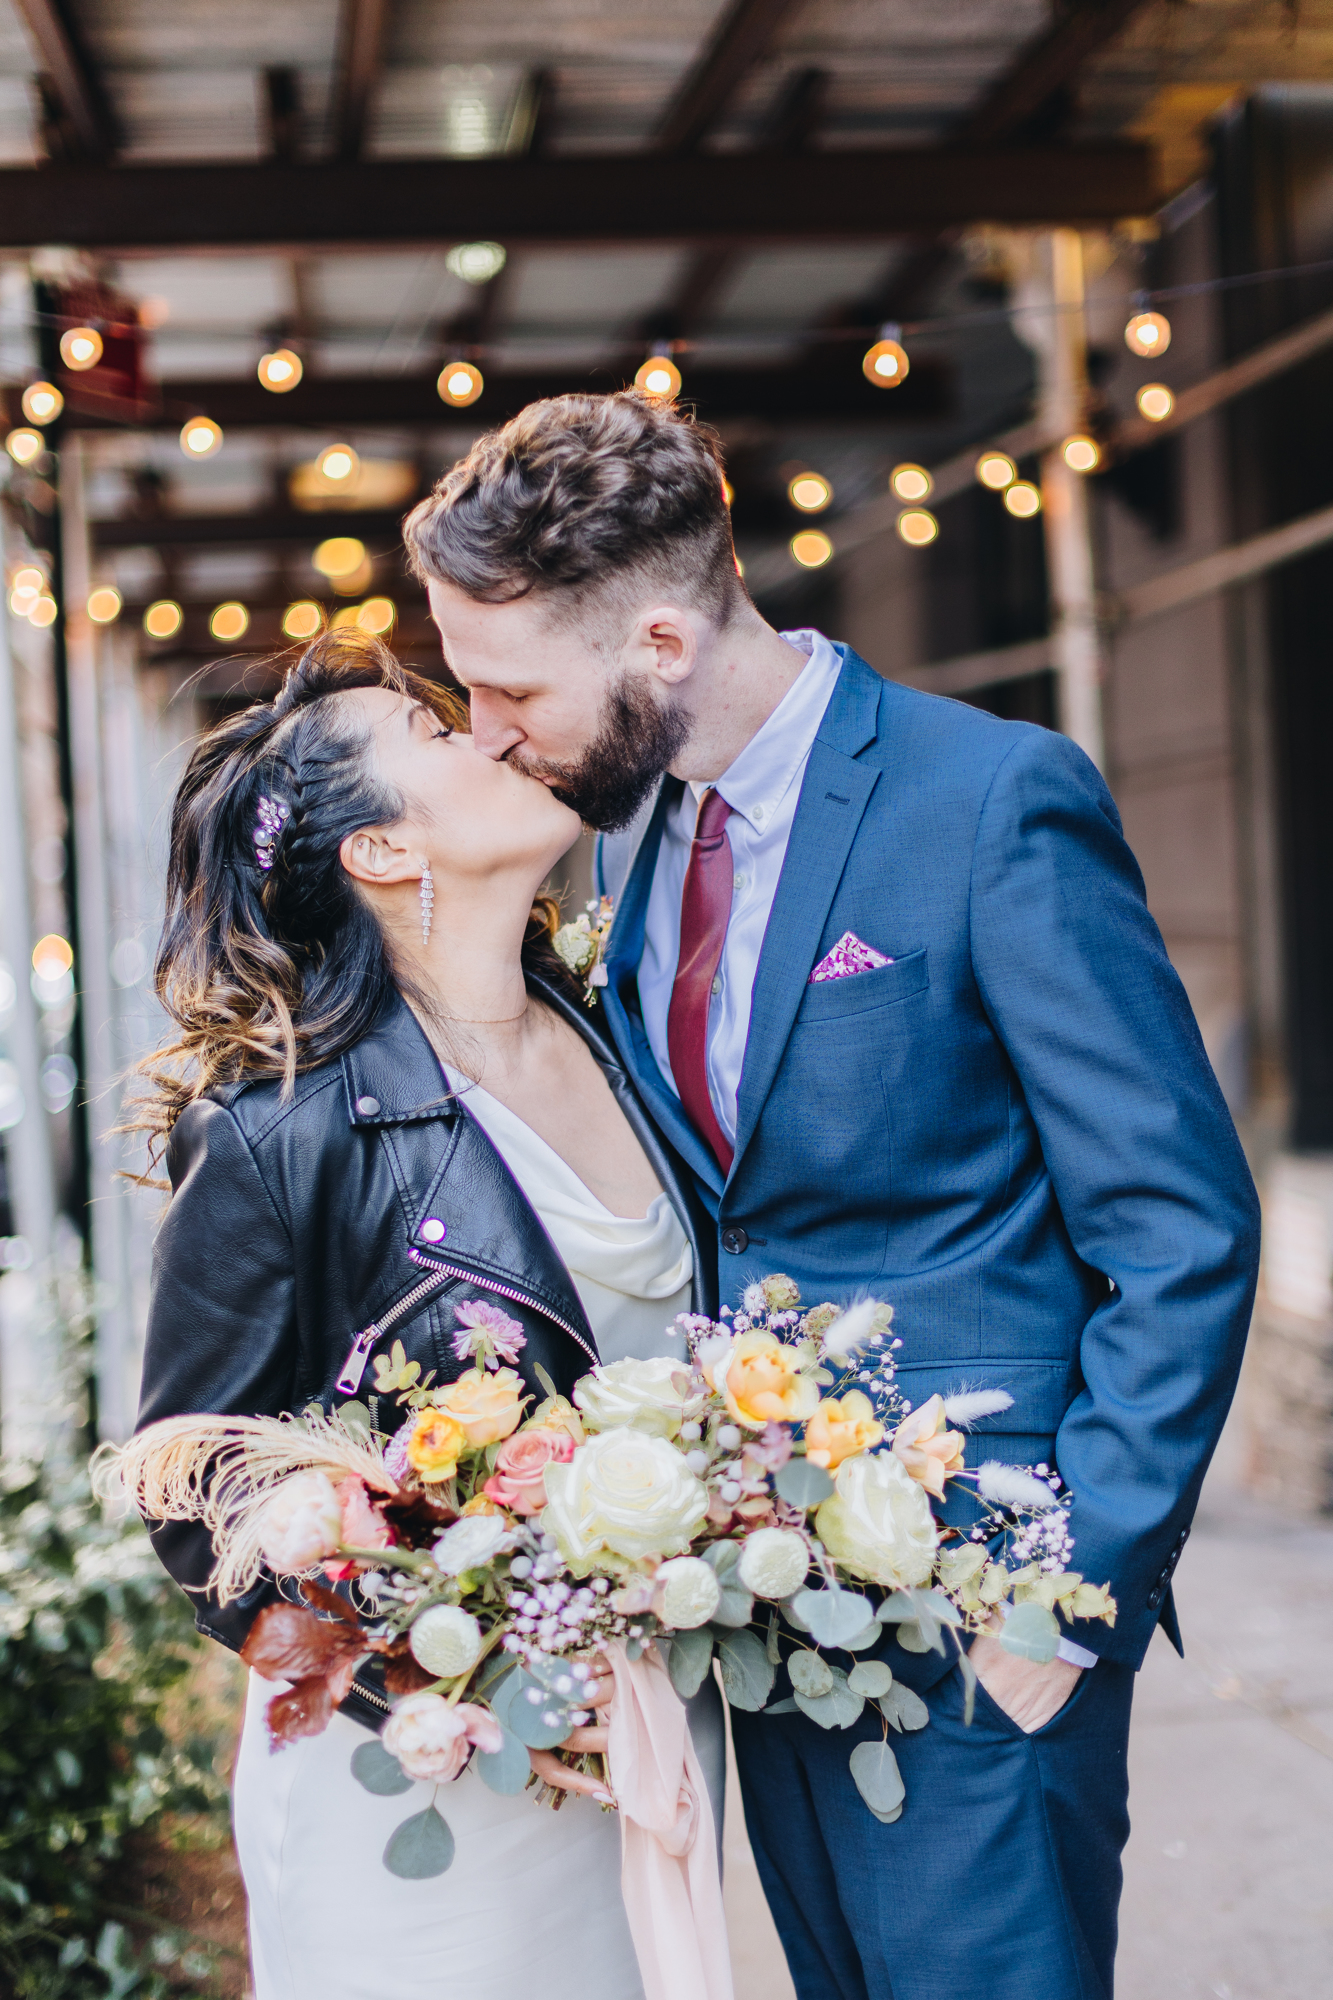 Romantic Fall DUMBO Elopement with NYC views and foliage